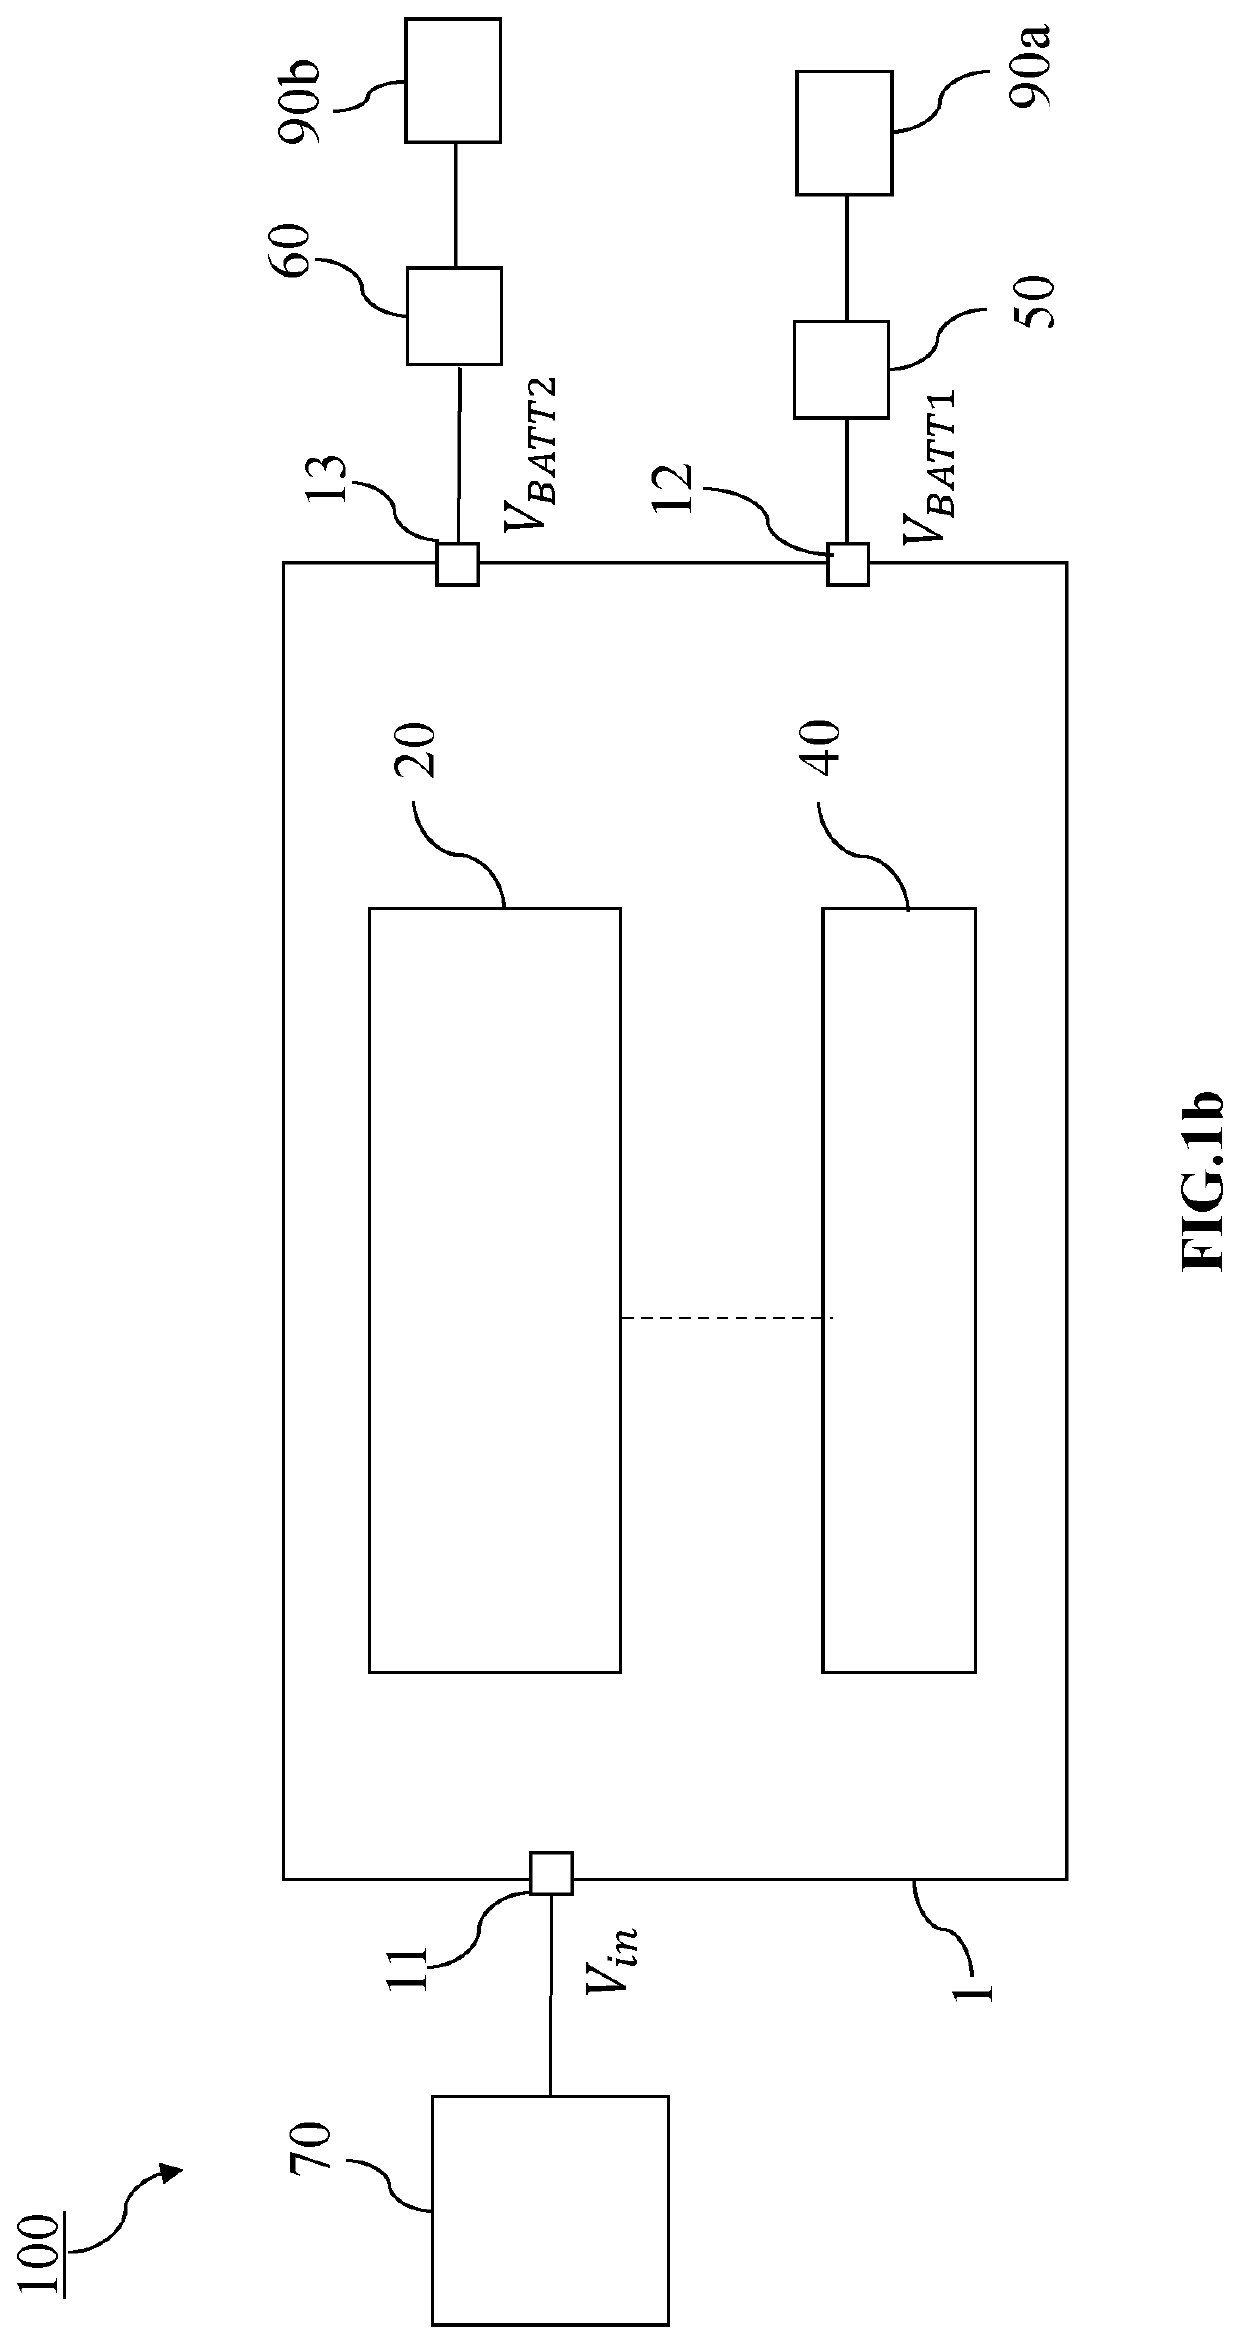 Method and device for energy harvesting and charging rechargeable energy storage devices